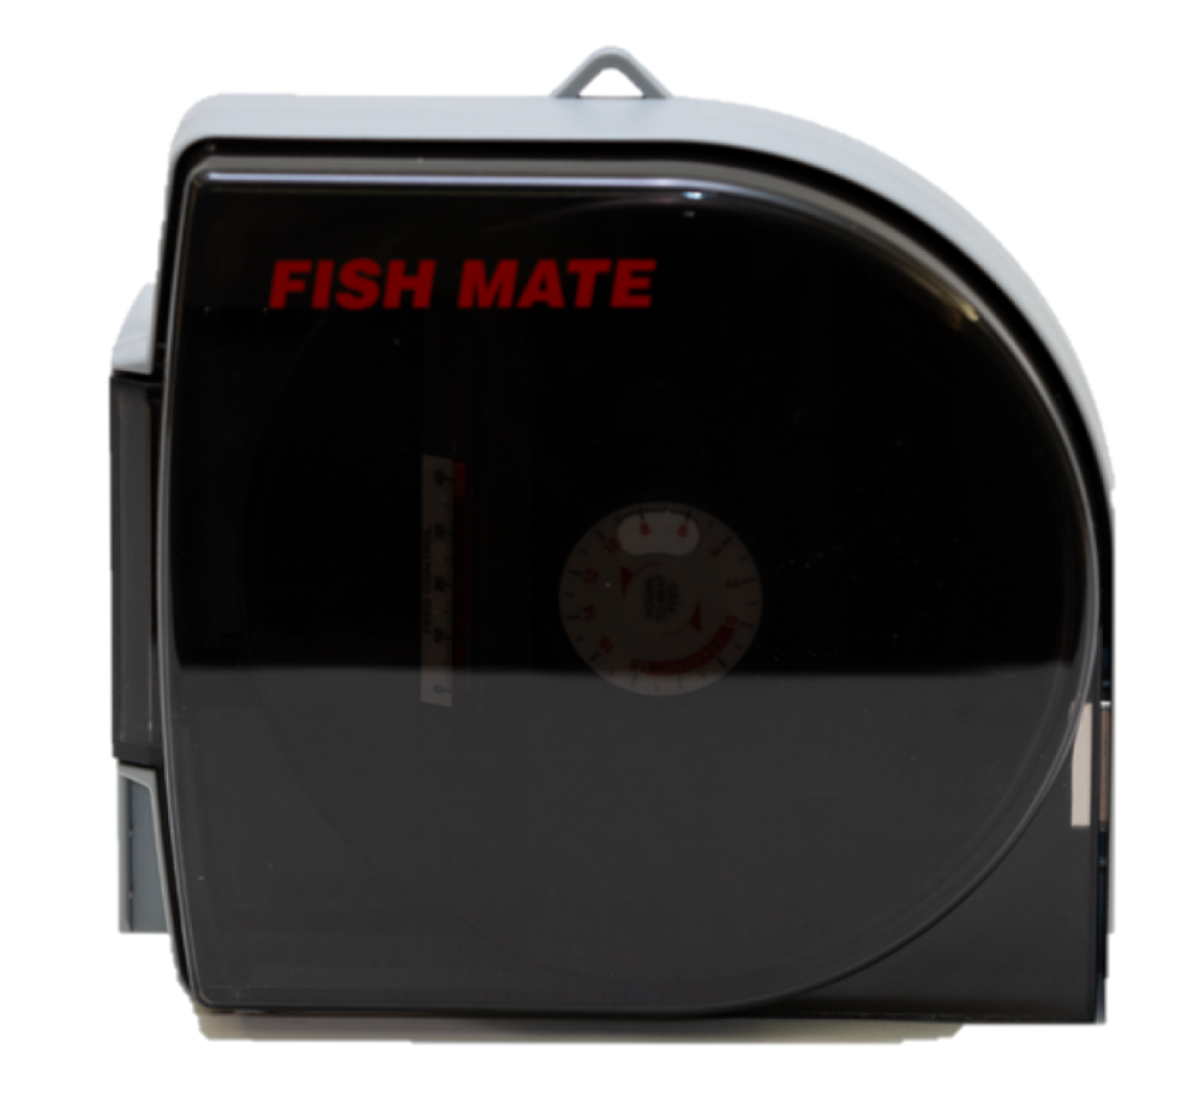 21-day Automatic Pond Fish Feeder (P21)